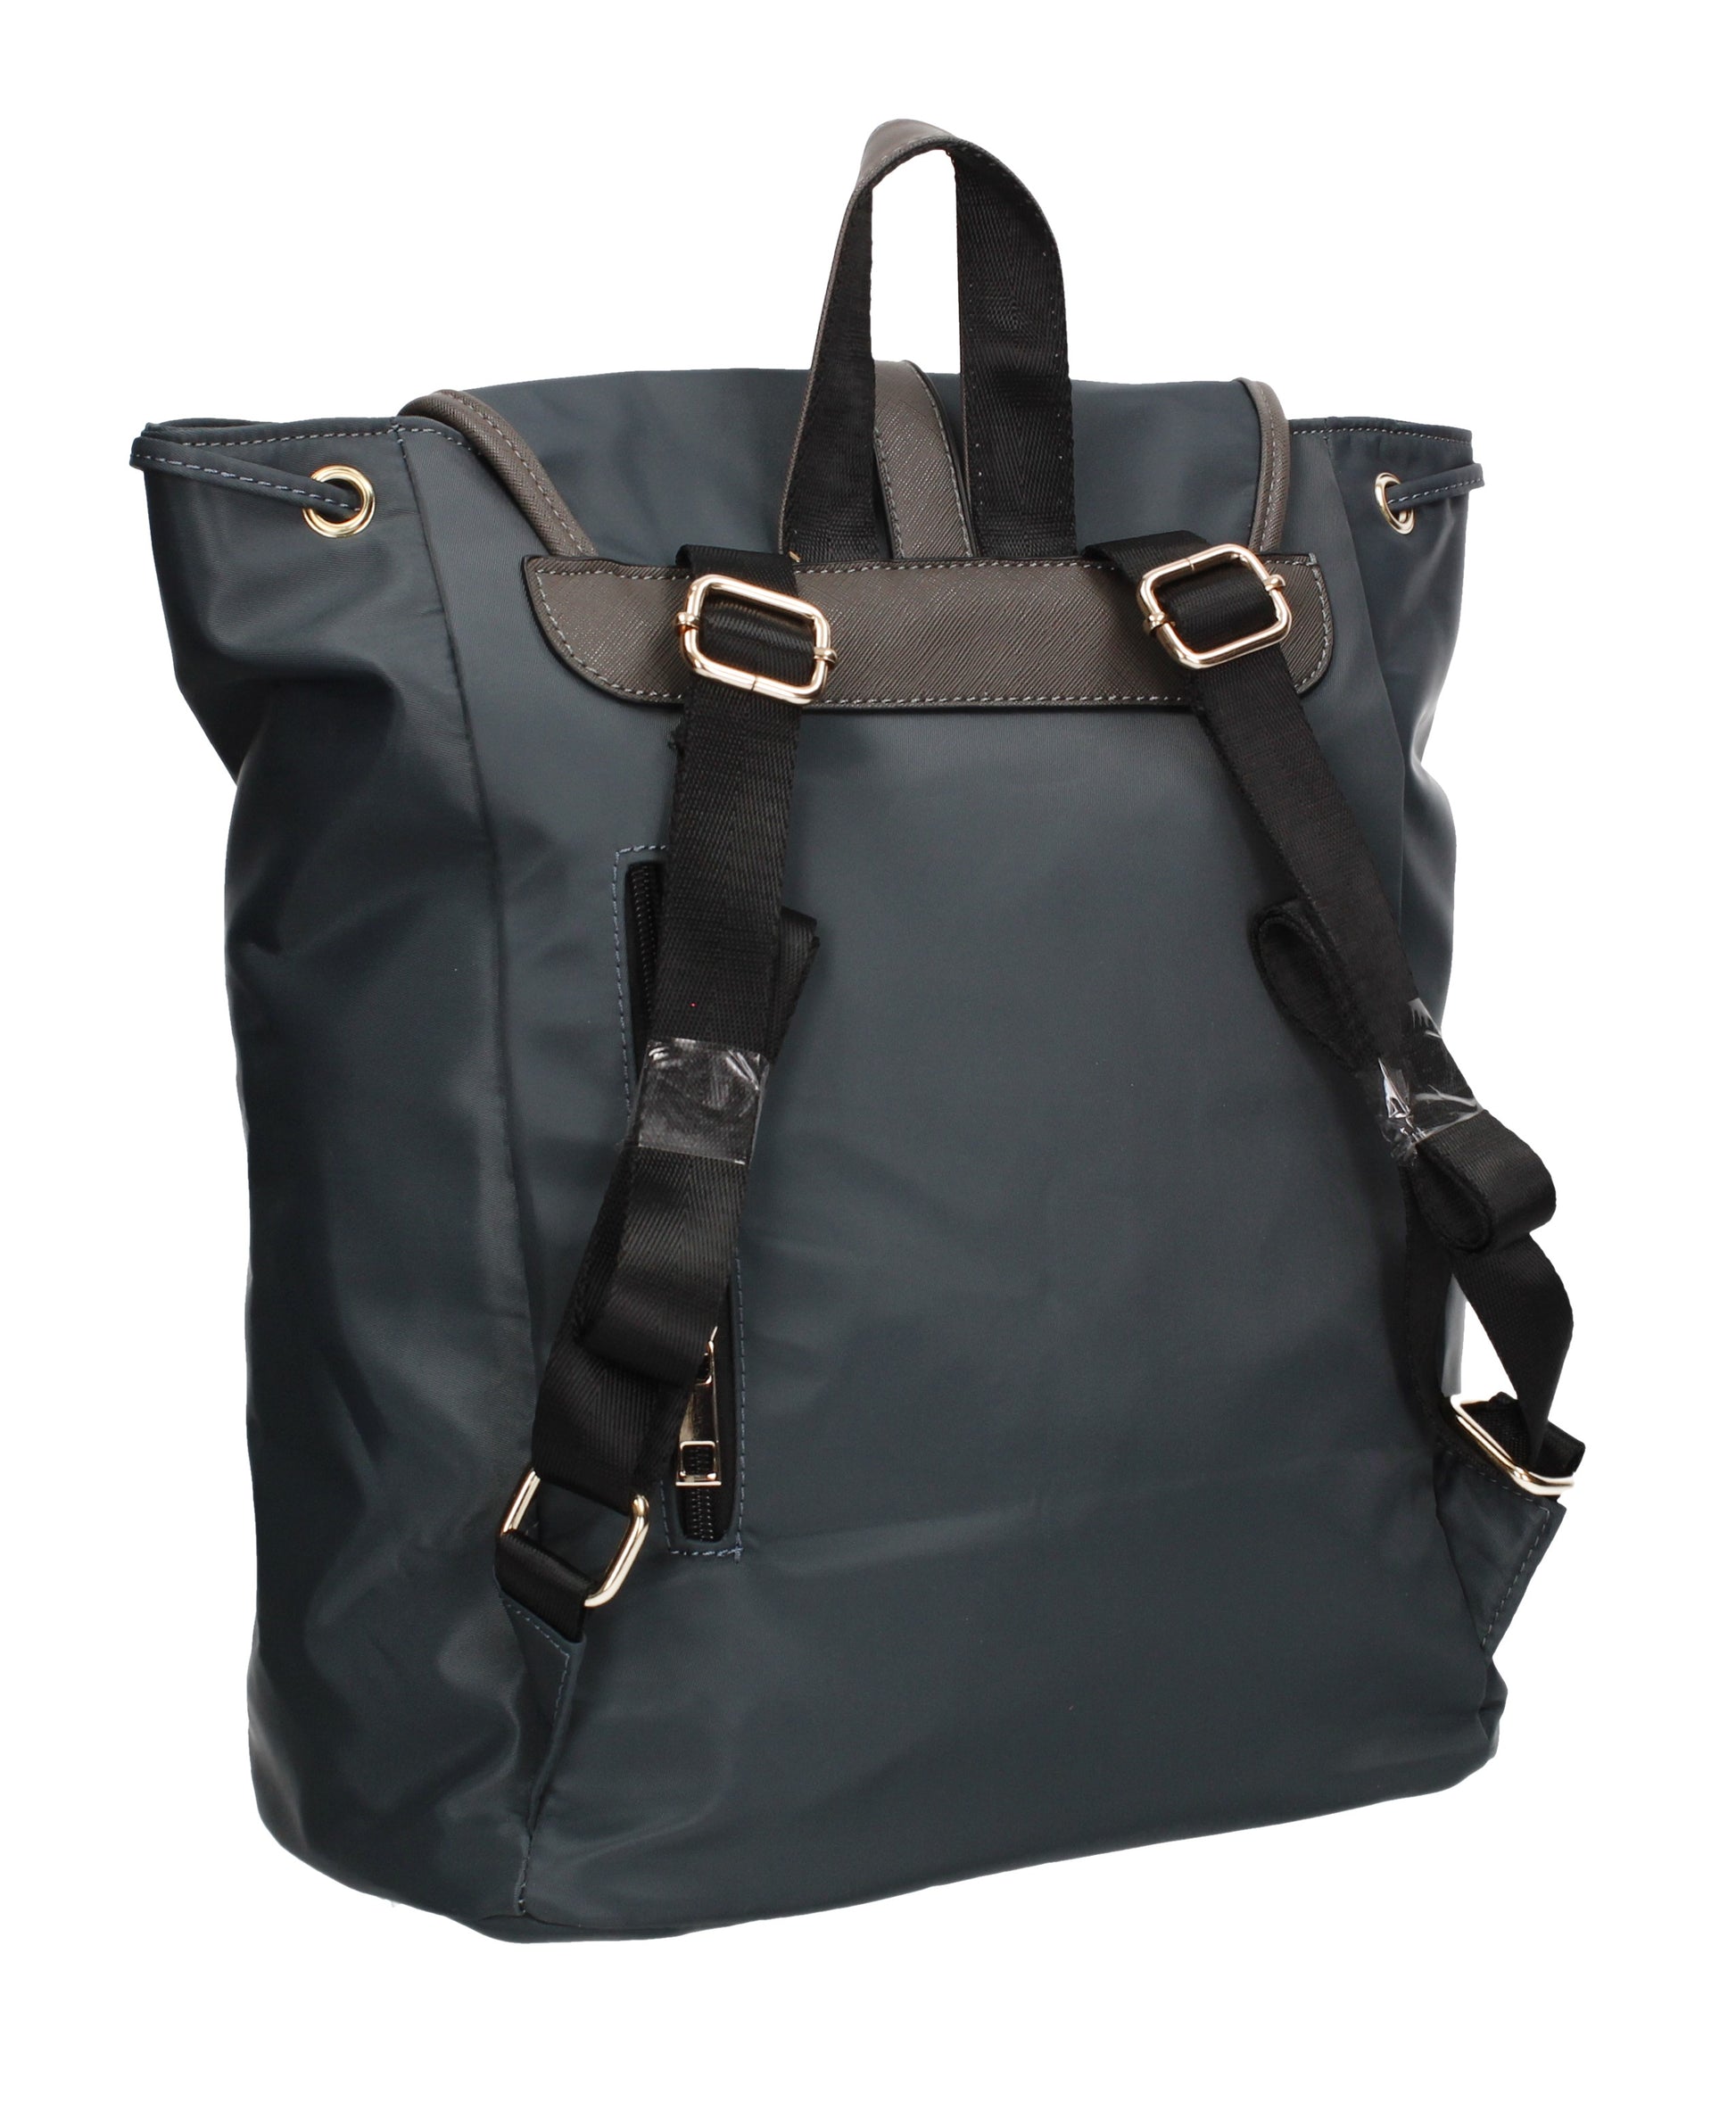 Swanky Swans Bailey Backpack Grey Perfect Backpack for school!